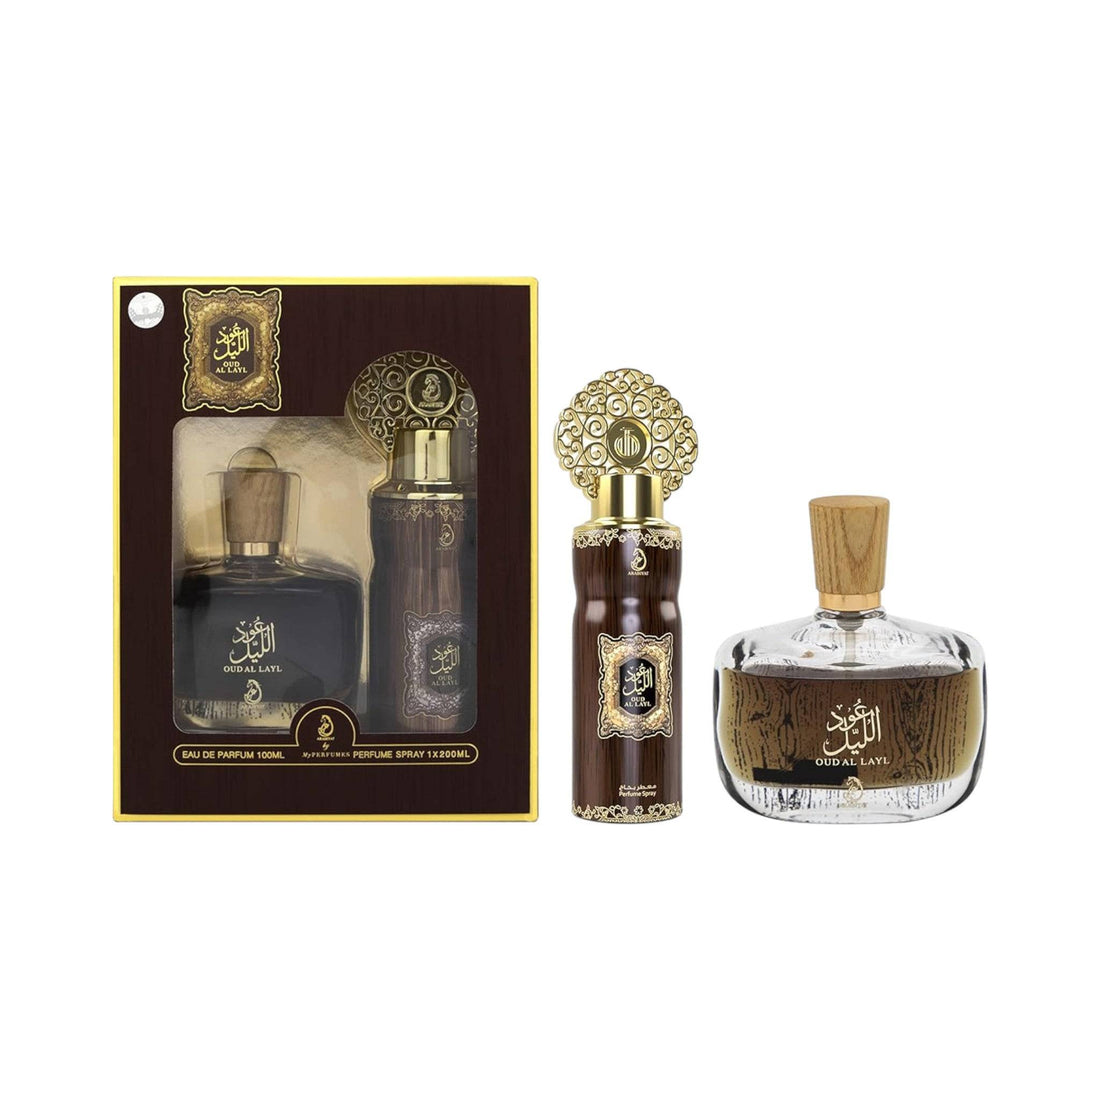 Oud Al Layl Gift Set by My Perfumes, capturing Arabian essence in a sophisticated bottle.